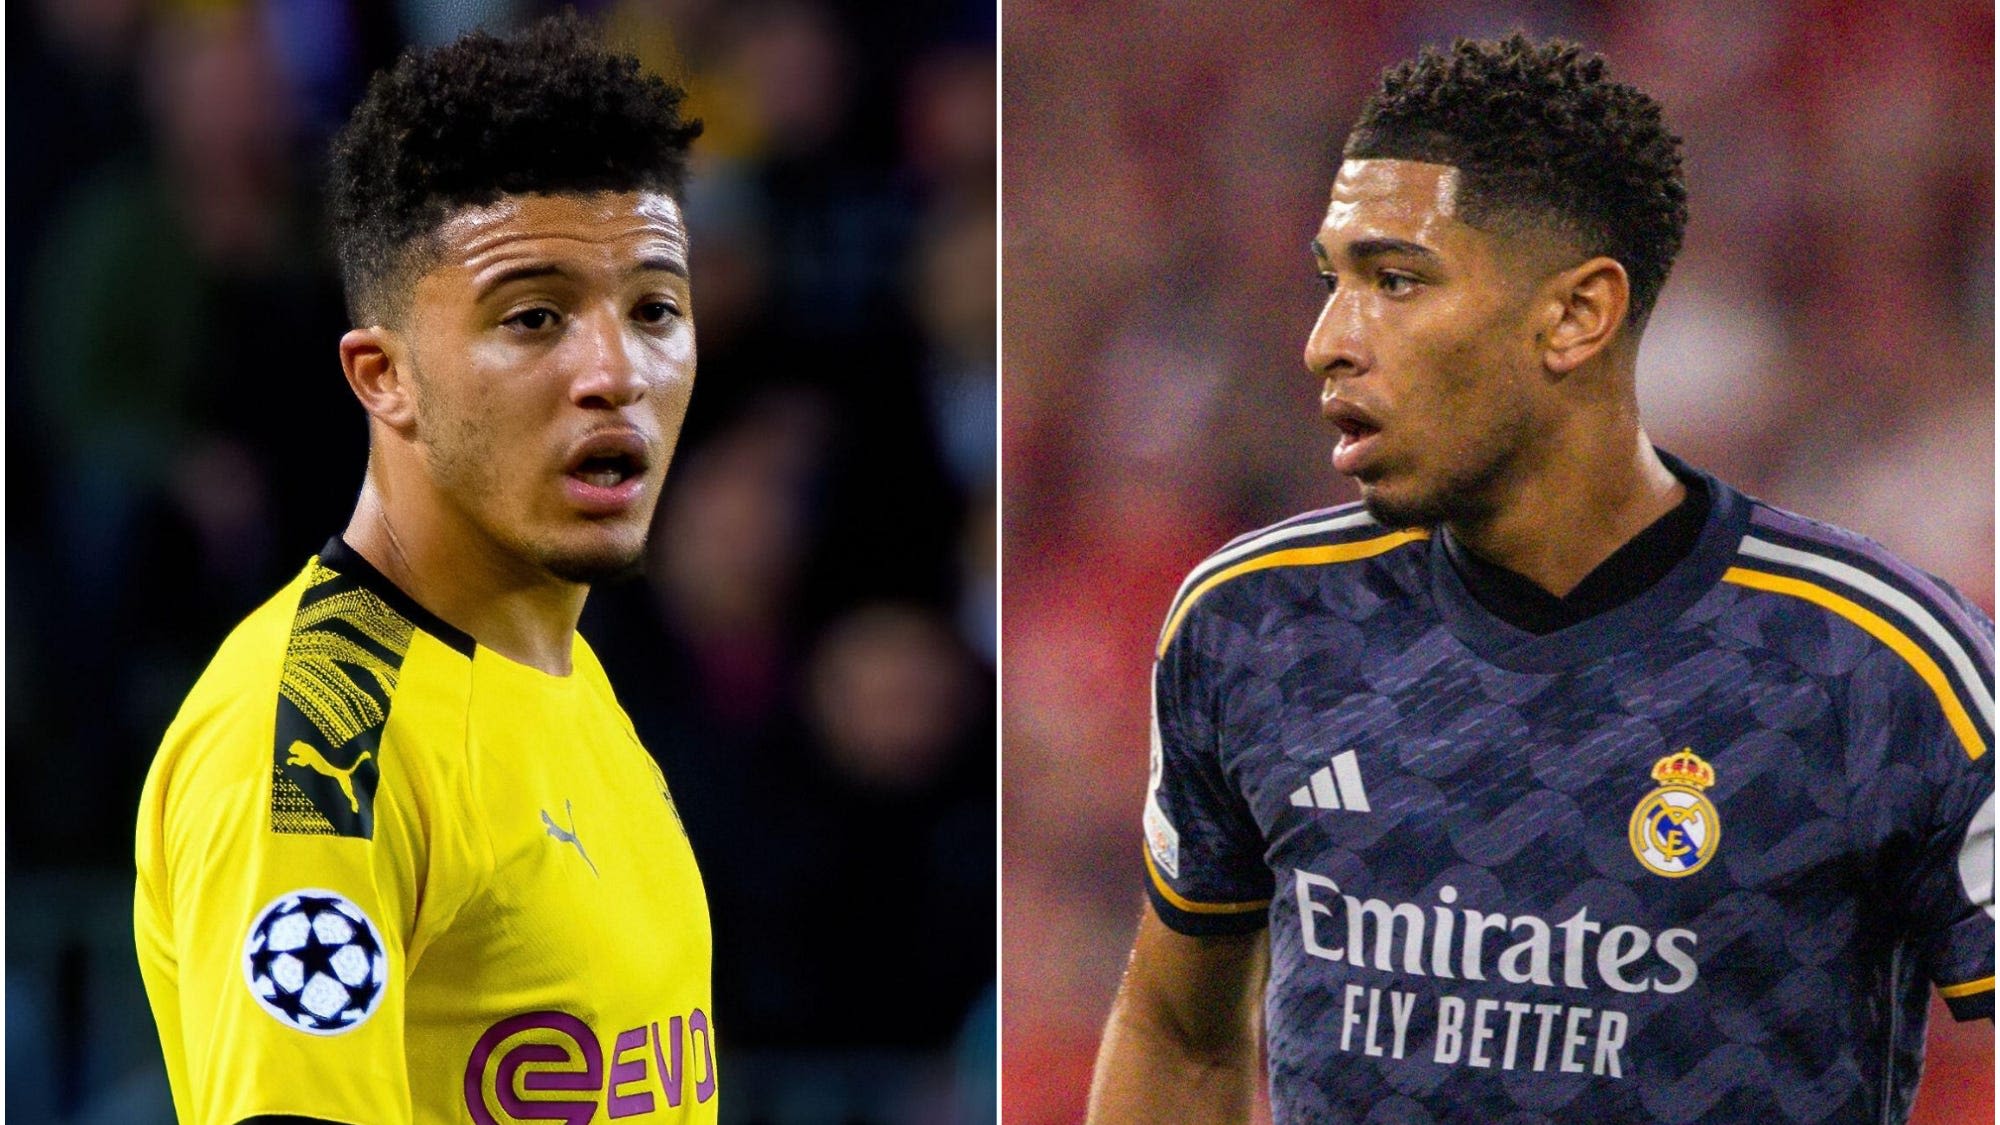 England’s Jadon Sancho and Jude Bellingham to meet in Champions League final